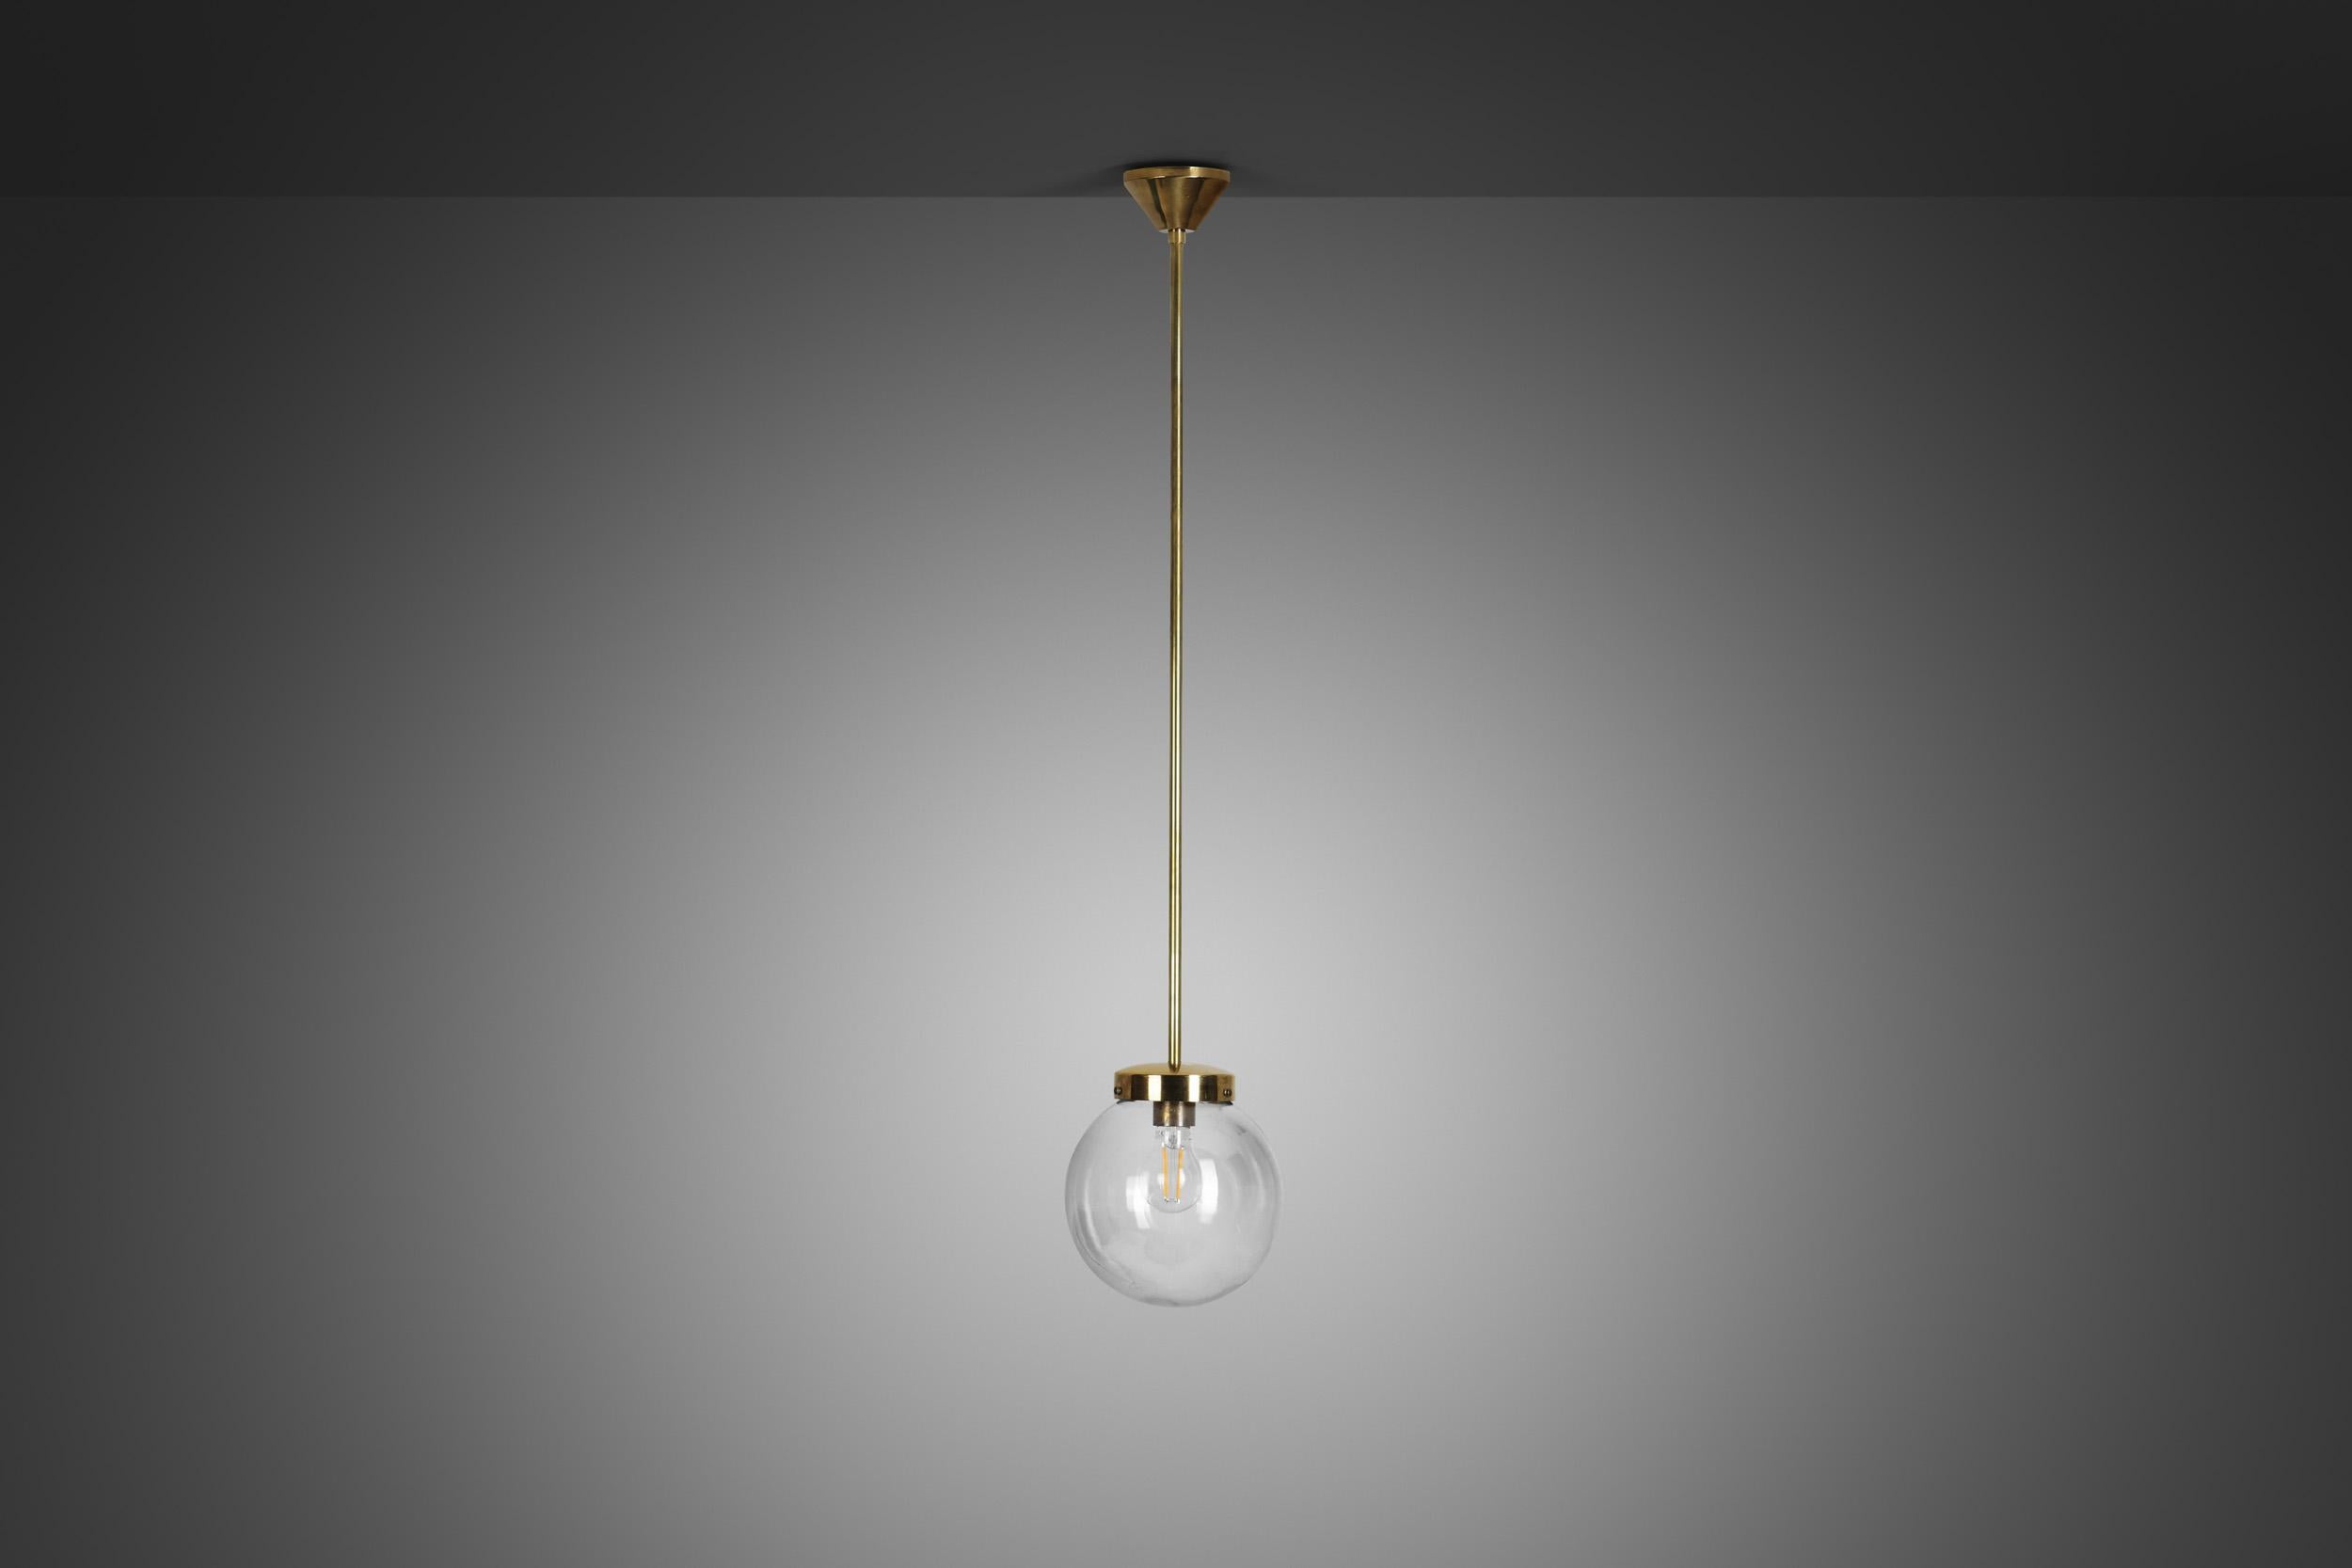 European Mid-Century Modern Brass and Glass Ceiling Lamp, Europe ca 1950s For Sale